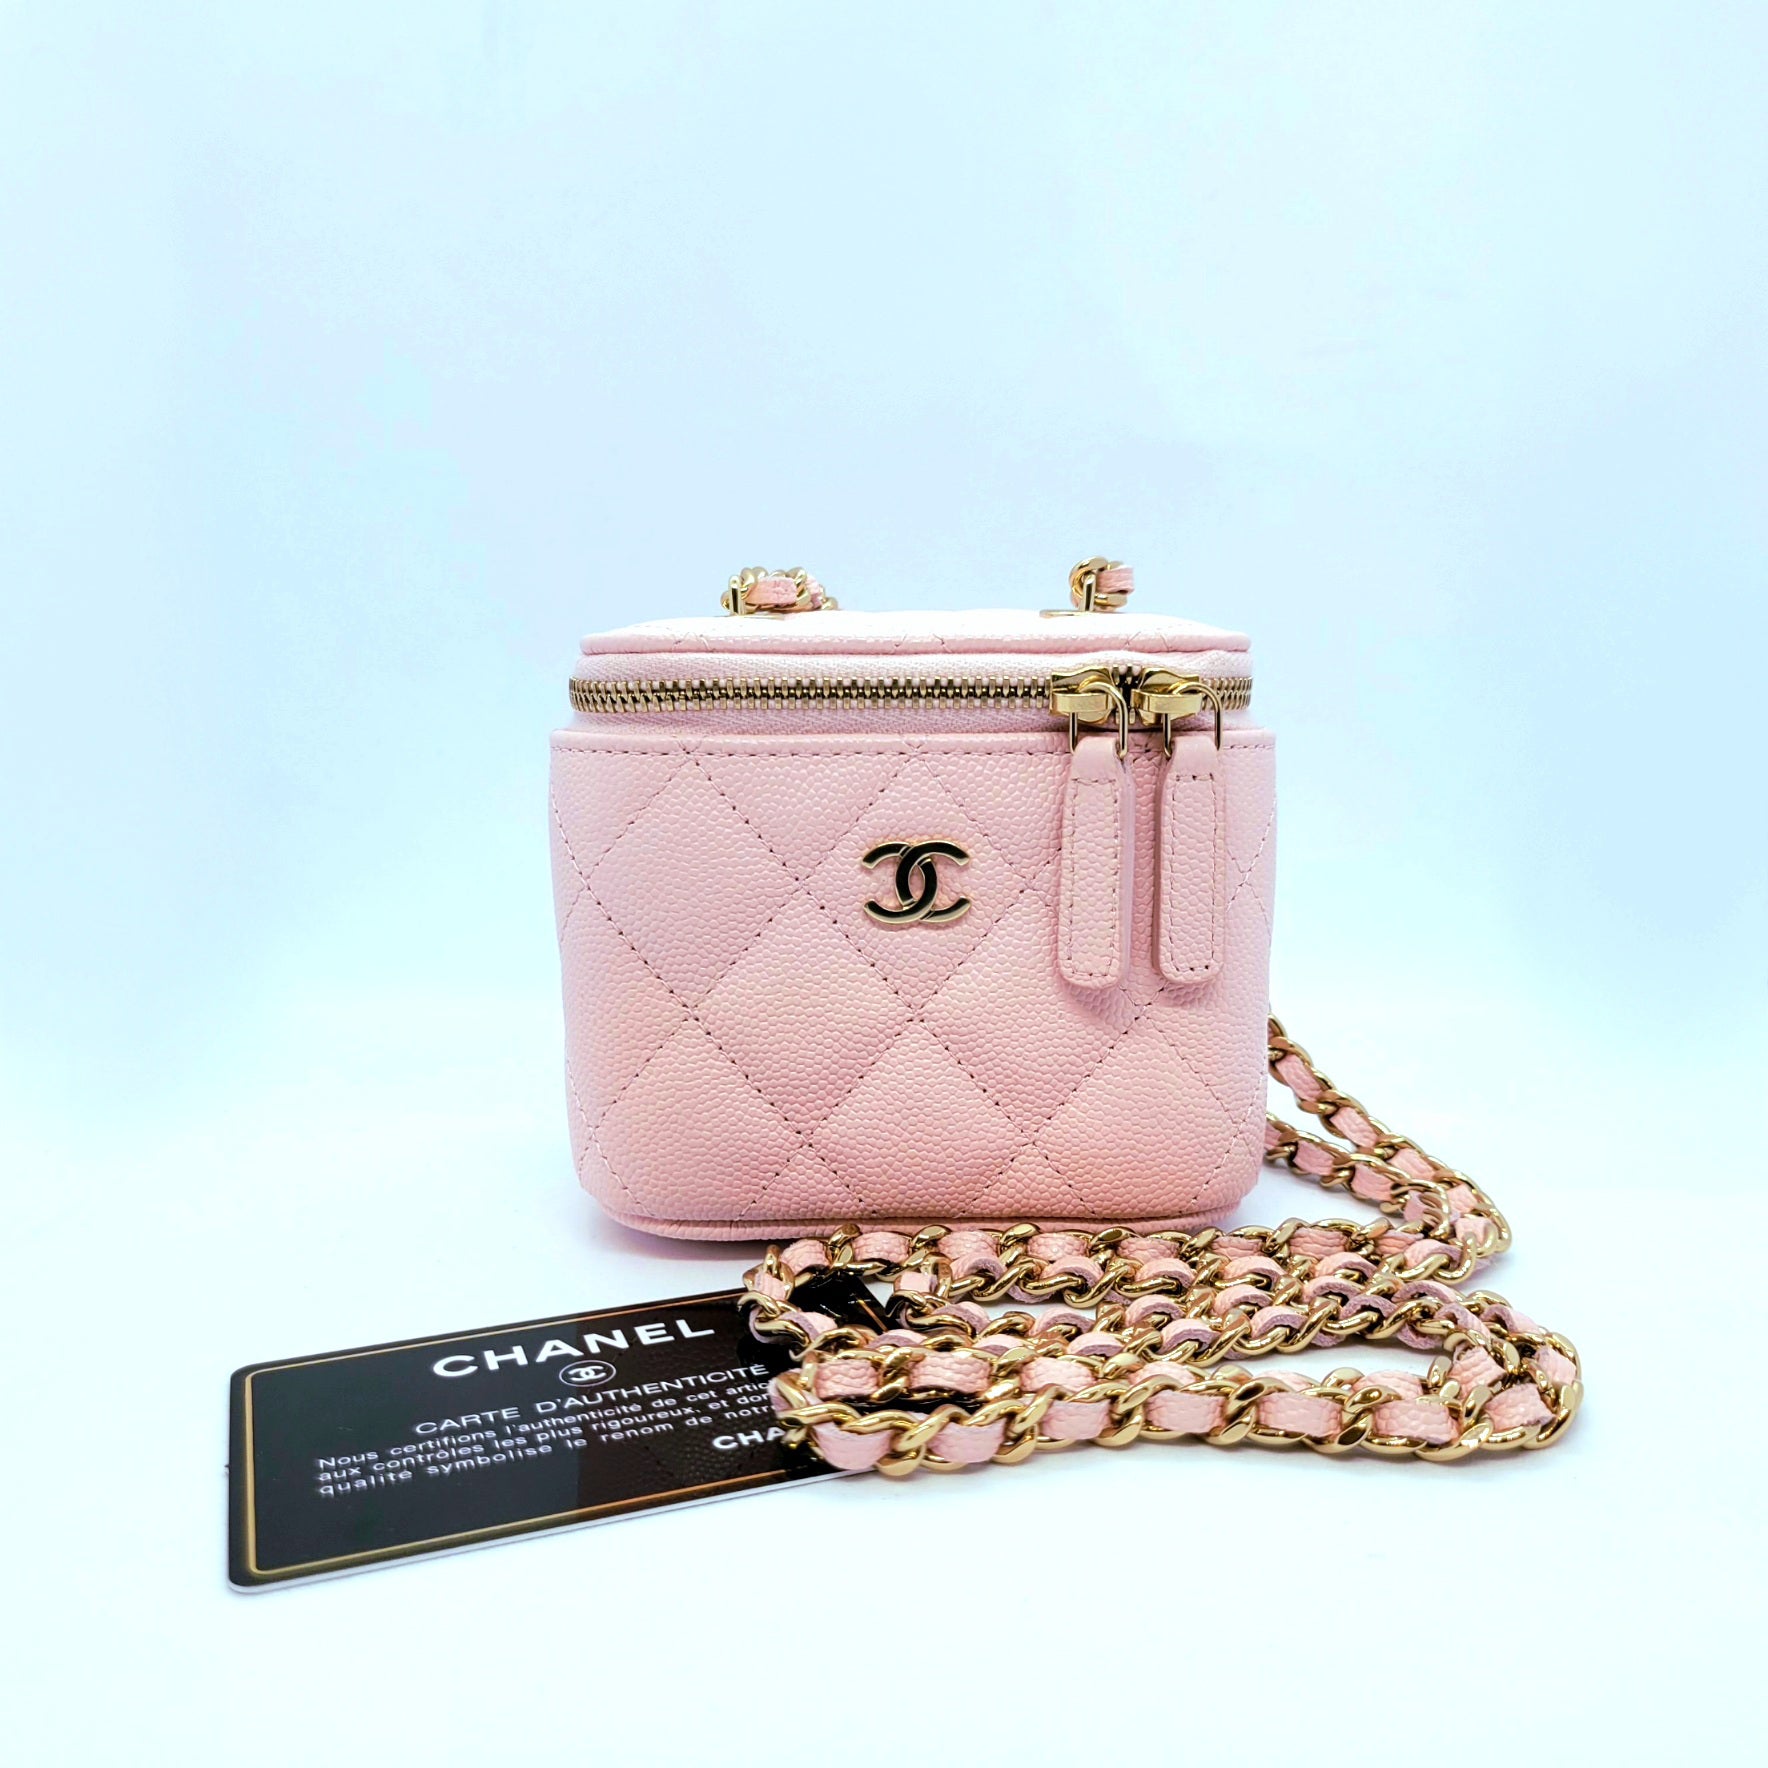 Brand New Chanel Small Vanity Case with Chain Pink Caviar Leather